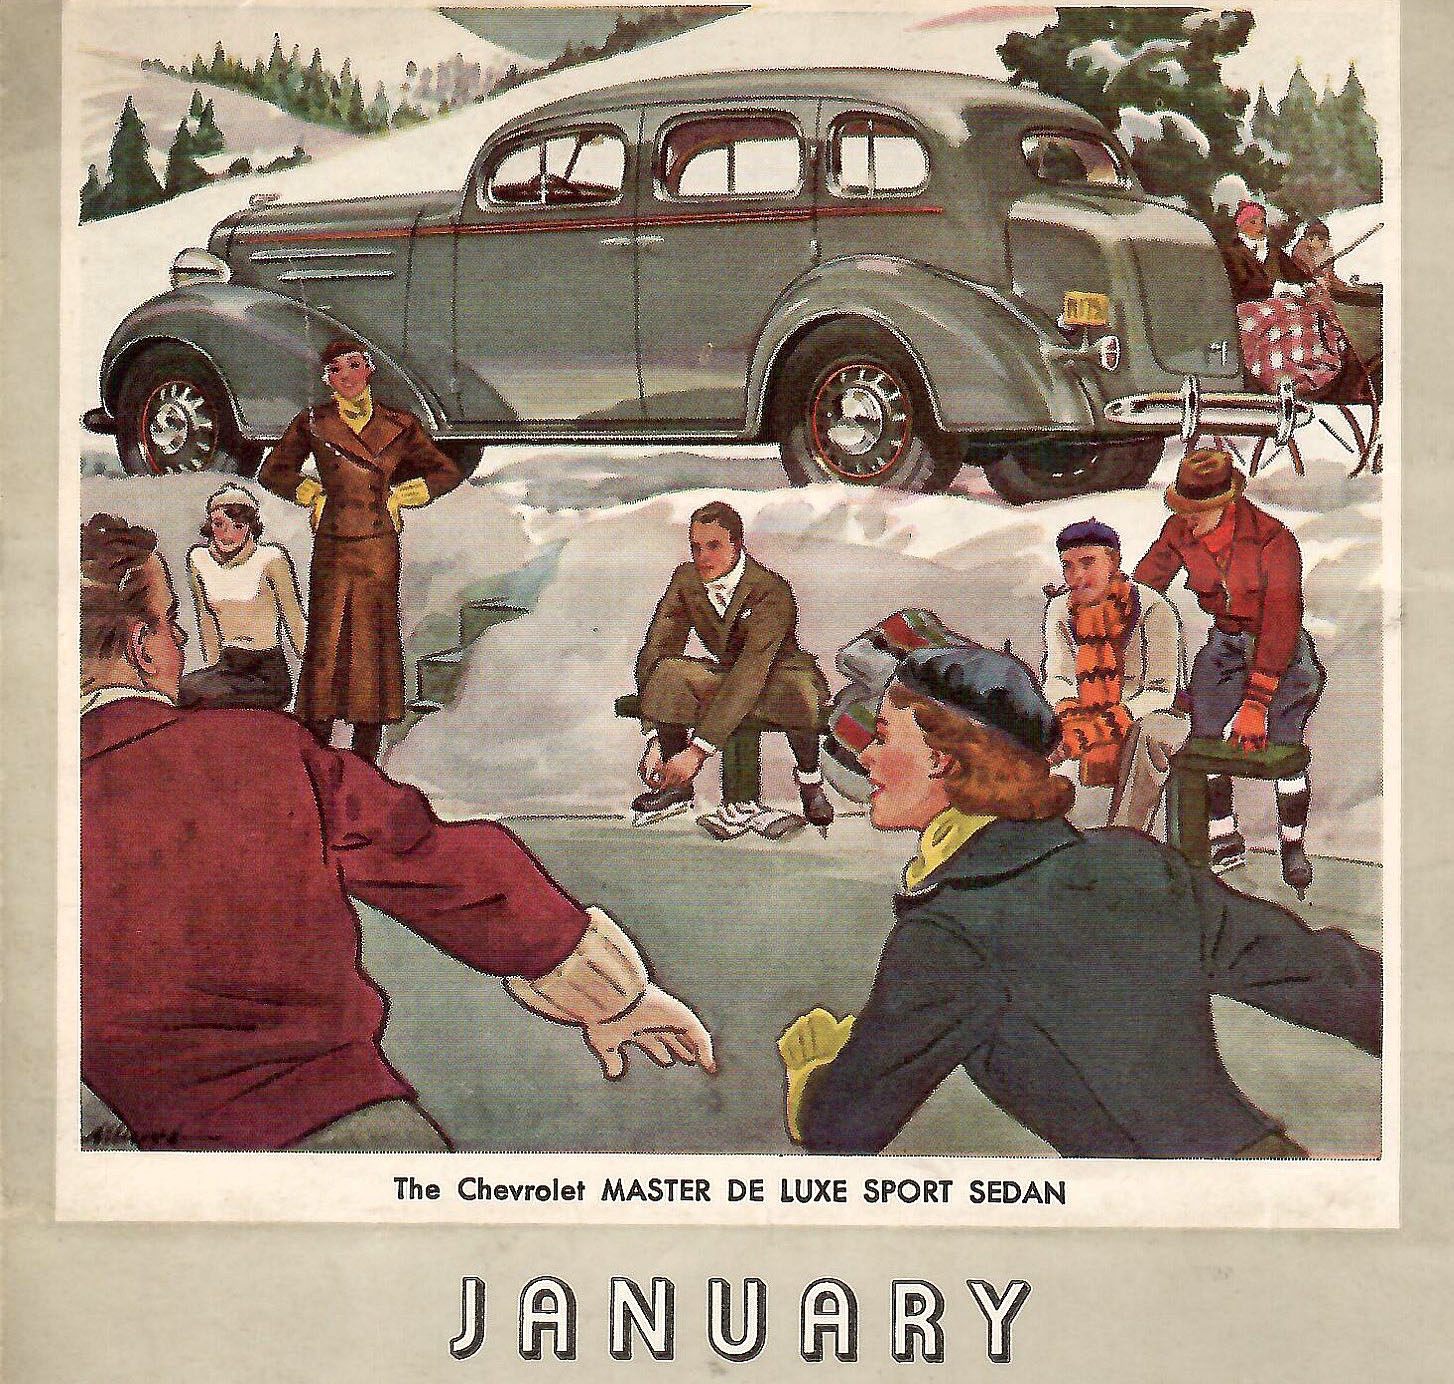 You are currently viewing Travel Through the Seasons Via this Vintage Car Calendar!